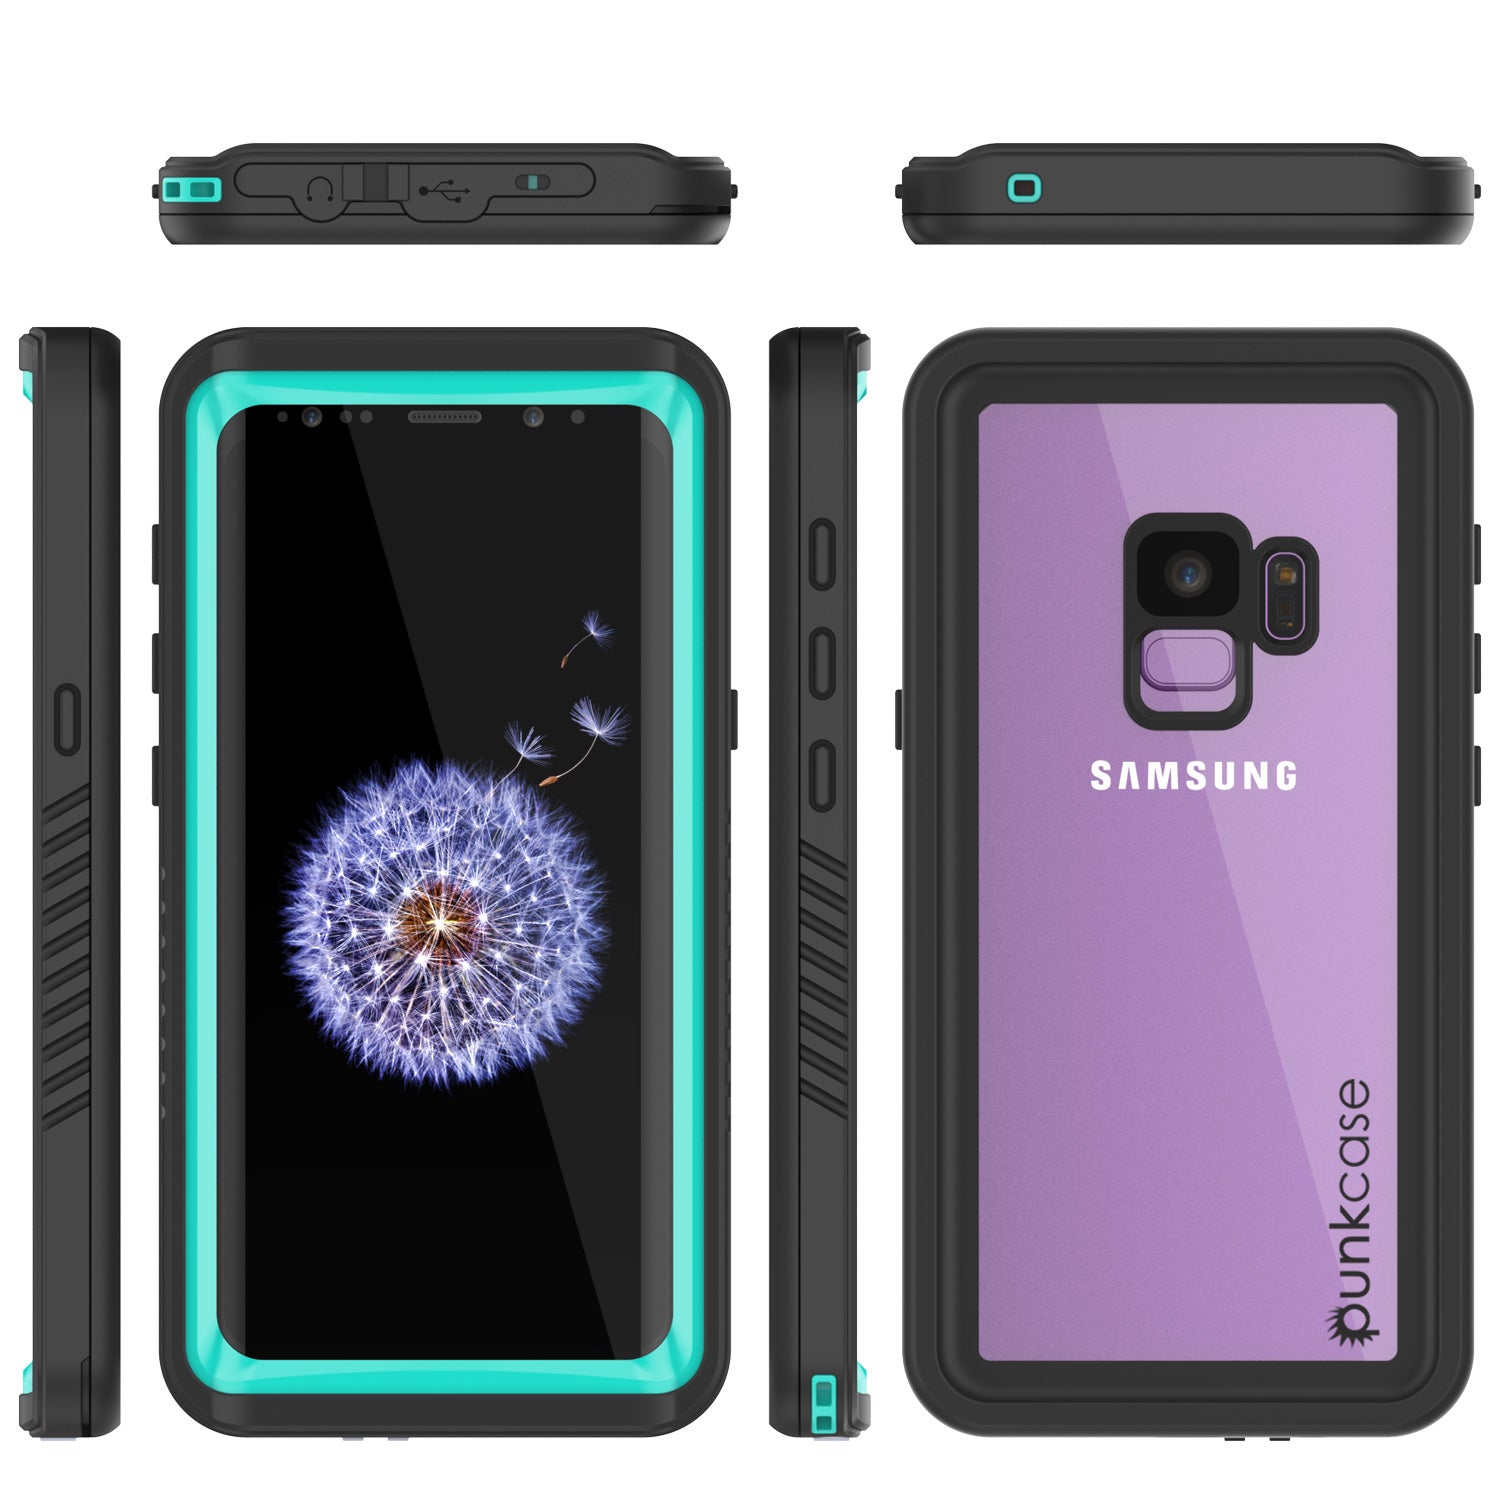 Galaxy S9 PLUS Waterproof Case, Punkcase [Extreme Series] [Slim Fit] [IP68 Certified] [Shockproof] [Snowproof] [Dirproof] Armor Cover W/ Built In Screen Protector for Samsung Galaxy S9+ [Teal] - PunkCase NZ